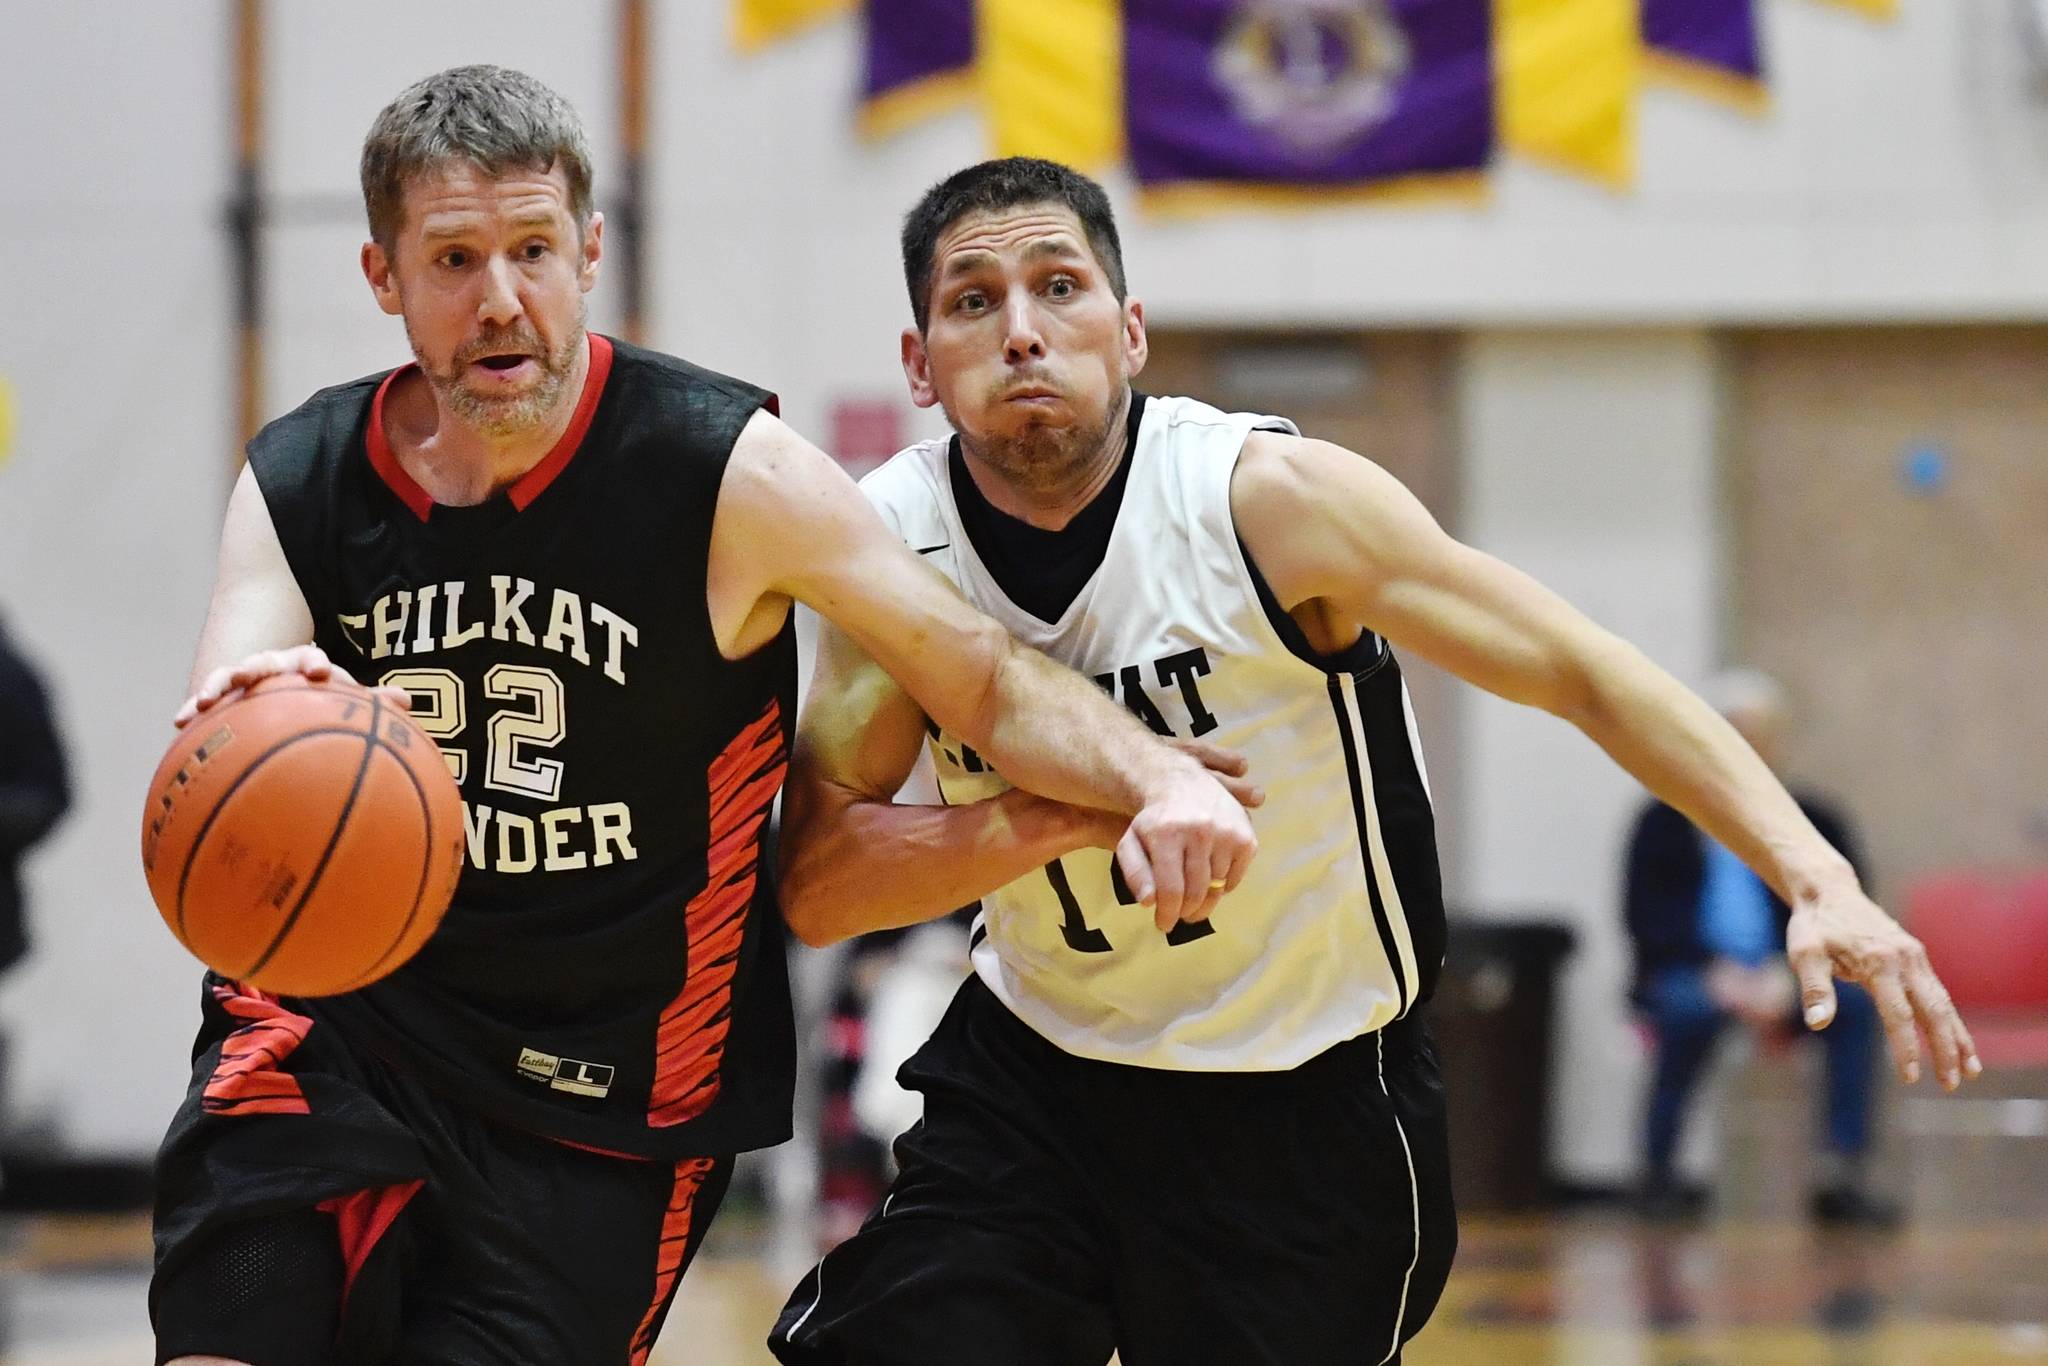 Klukwan’s Dave Buss, left, drives against Yakutat’s Ralph Johnson during their masters bracket game at the Gold Medal Basketball Tournament on Friday, March 22, 2019. (Michael Penn | Juneau Empire)